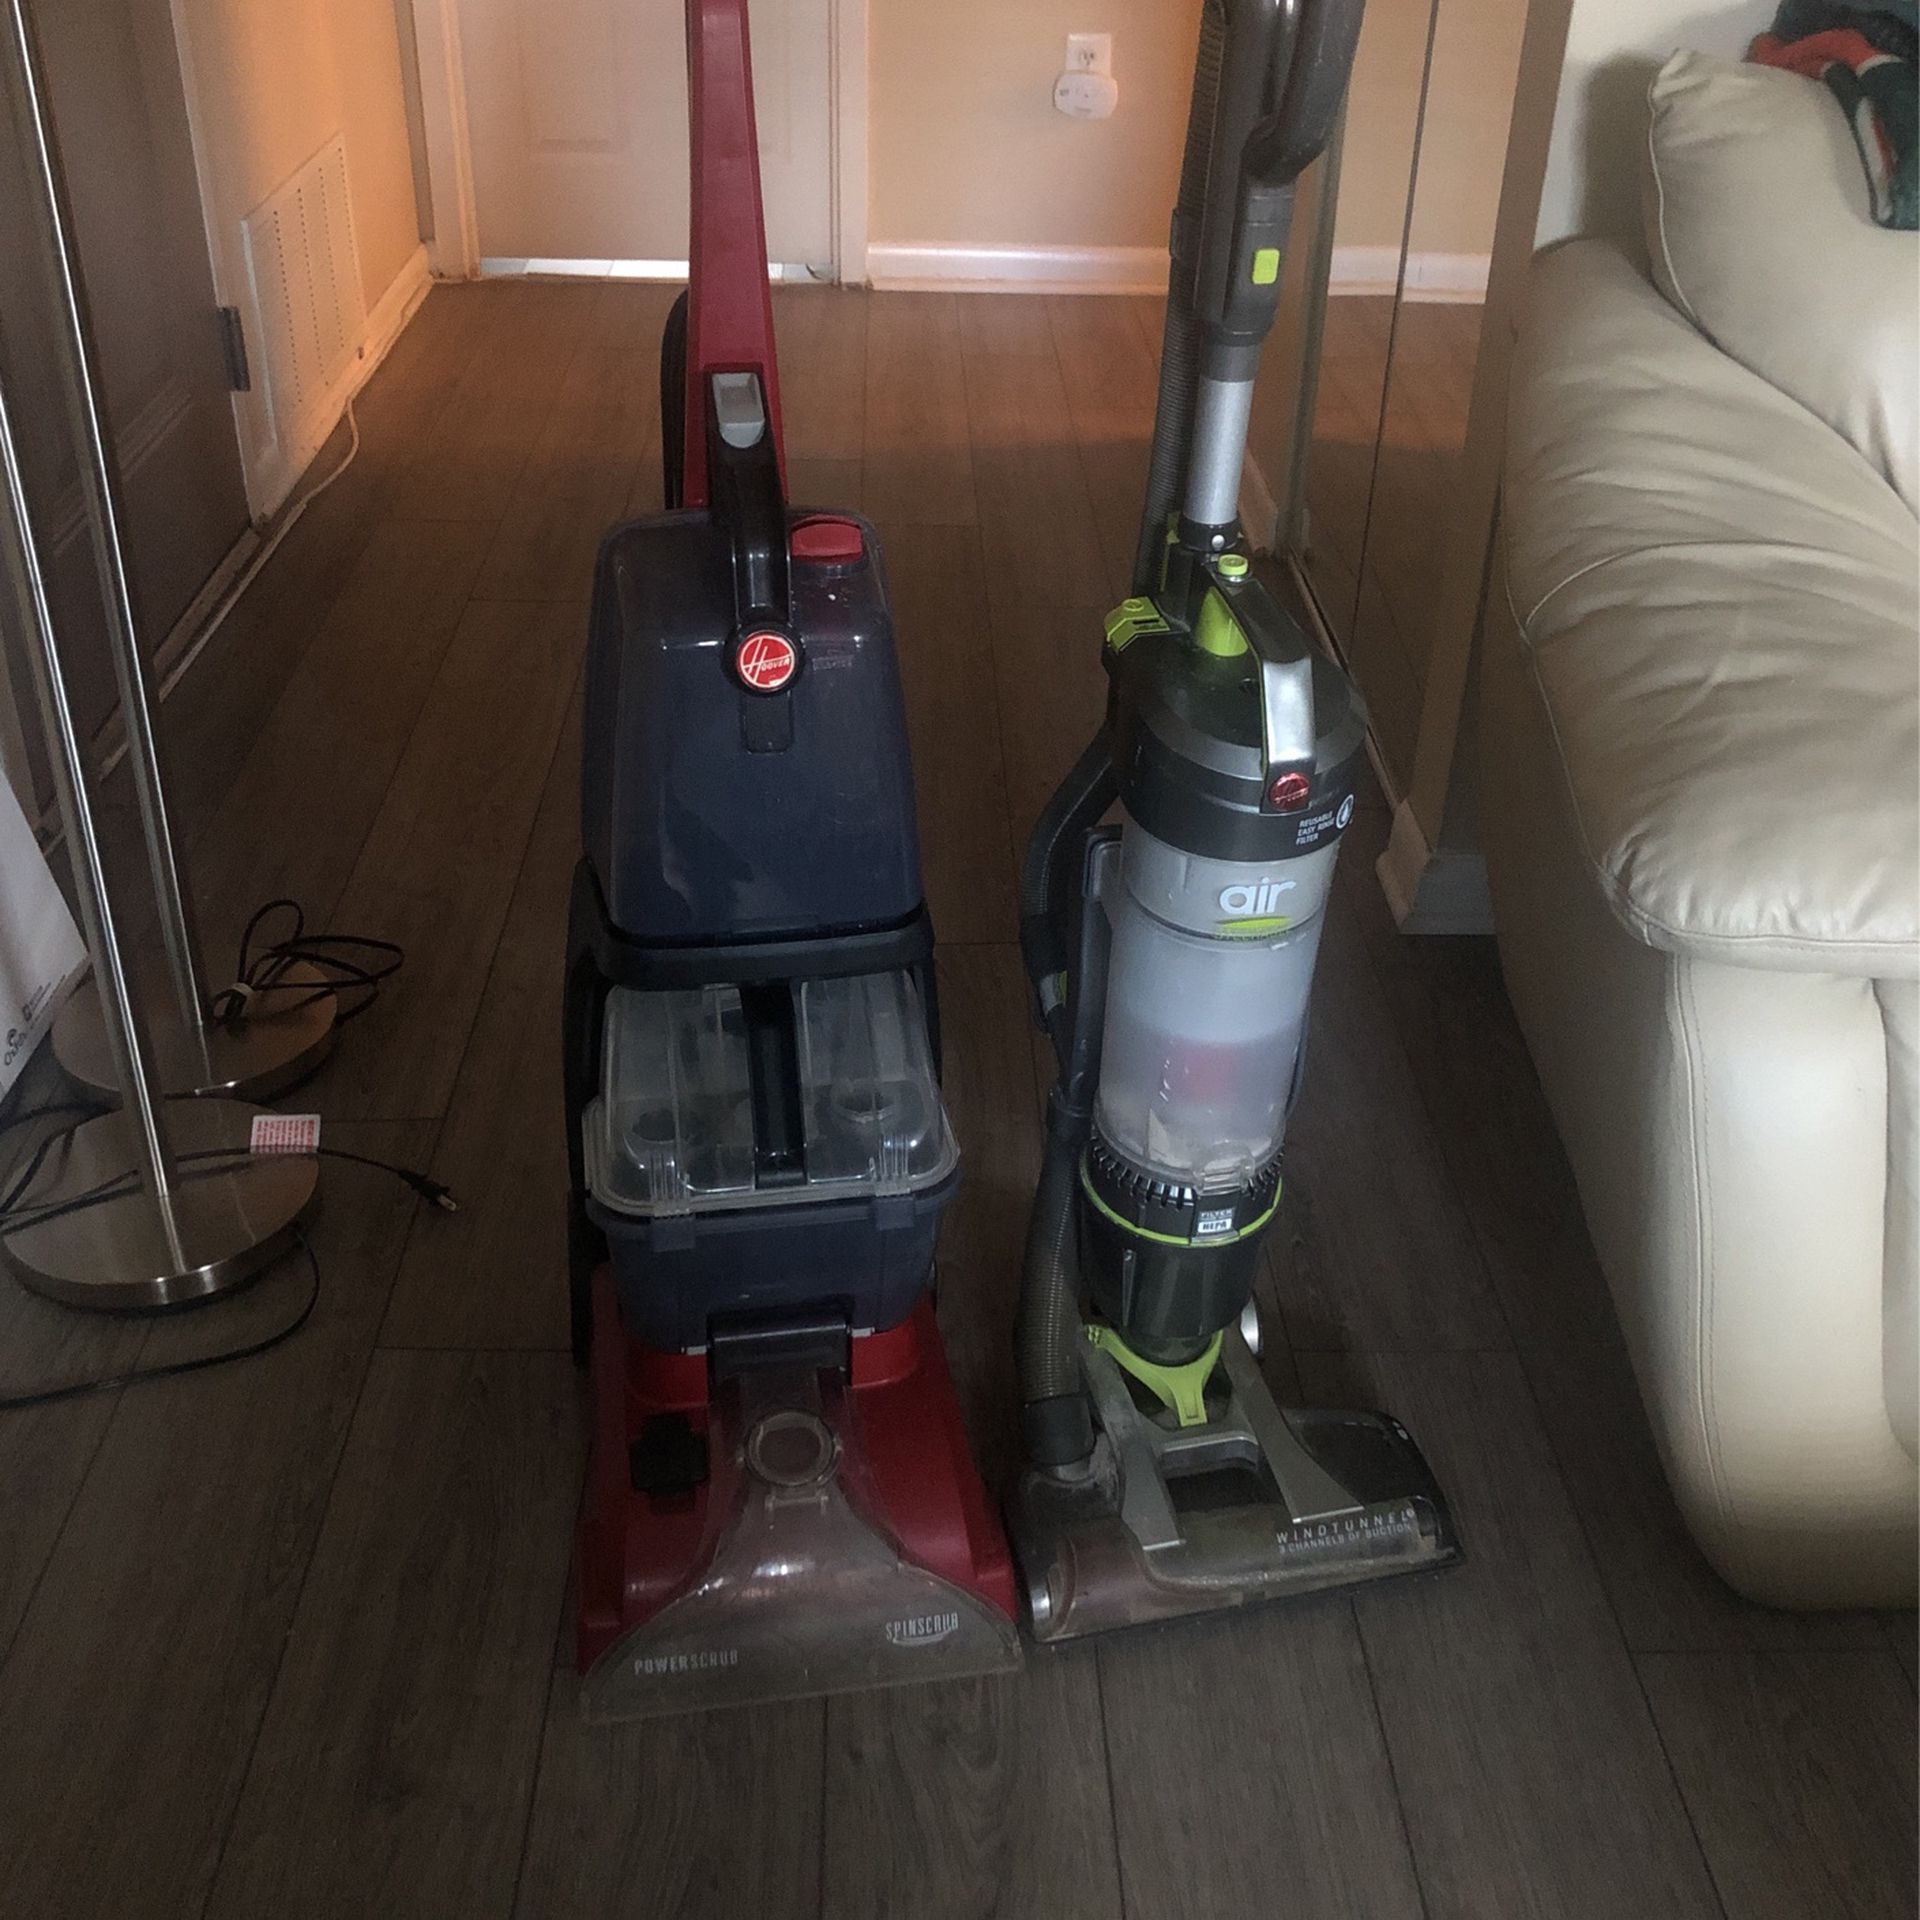 Hoover Shampooer And Dyson Wind tunnel